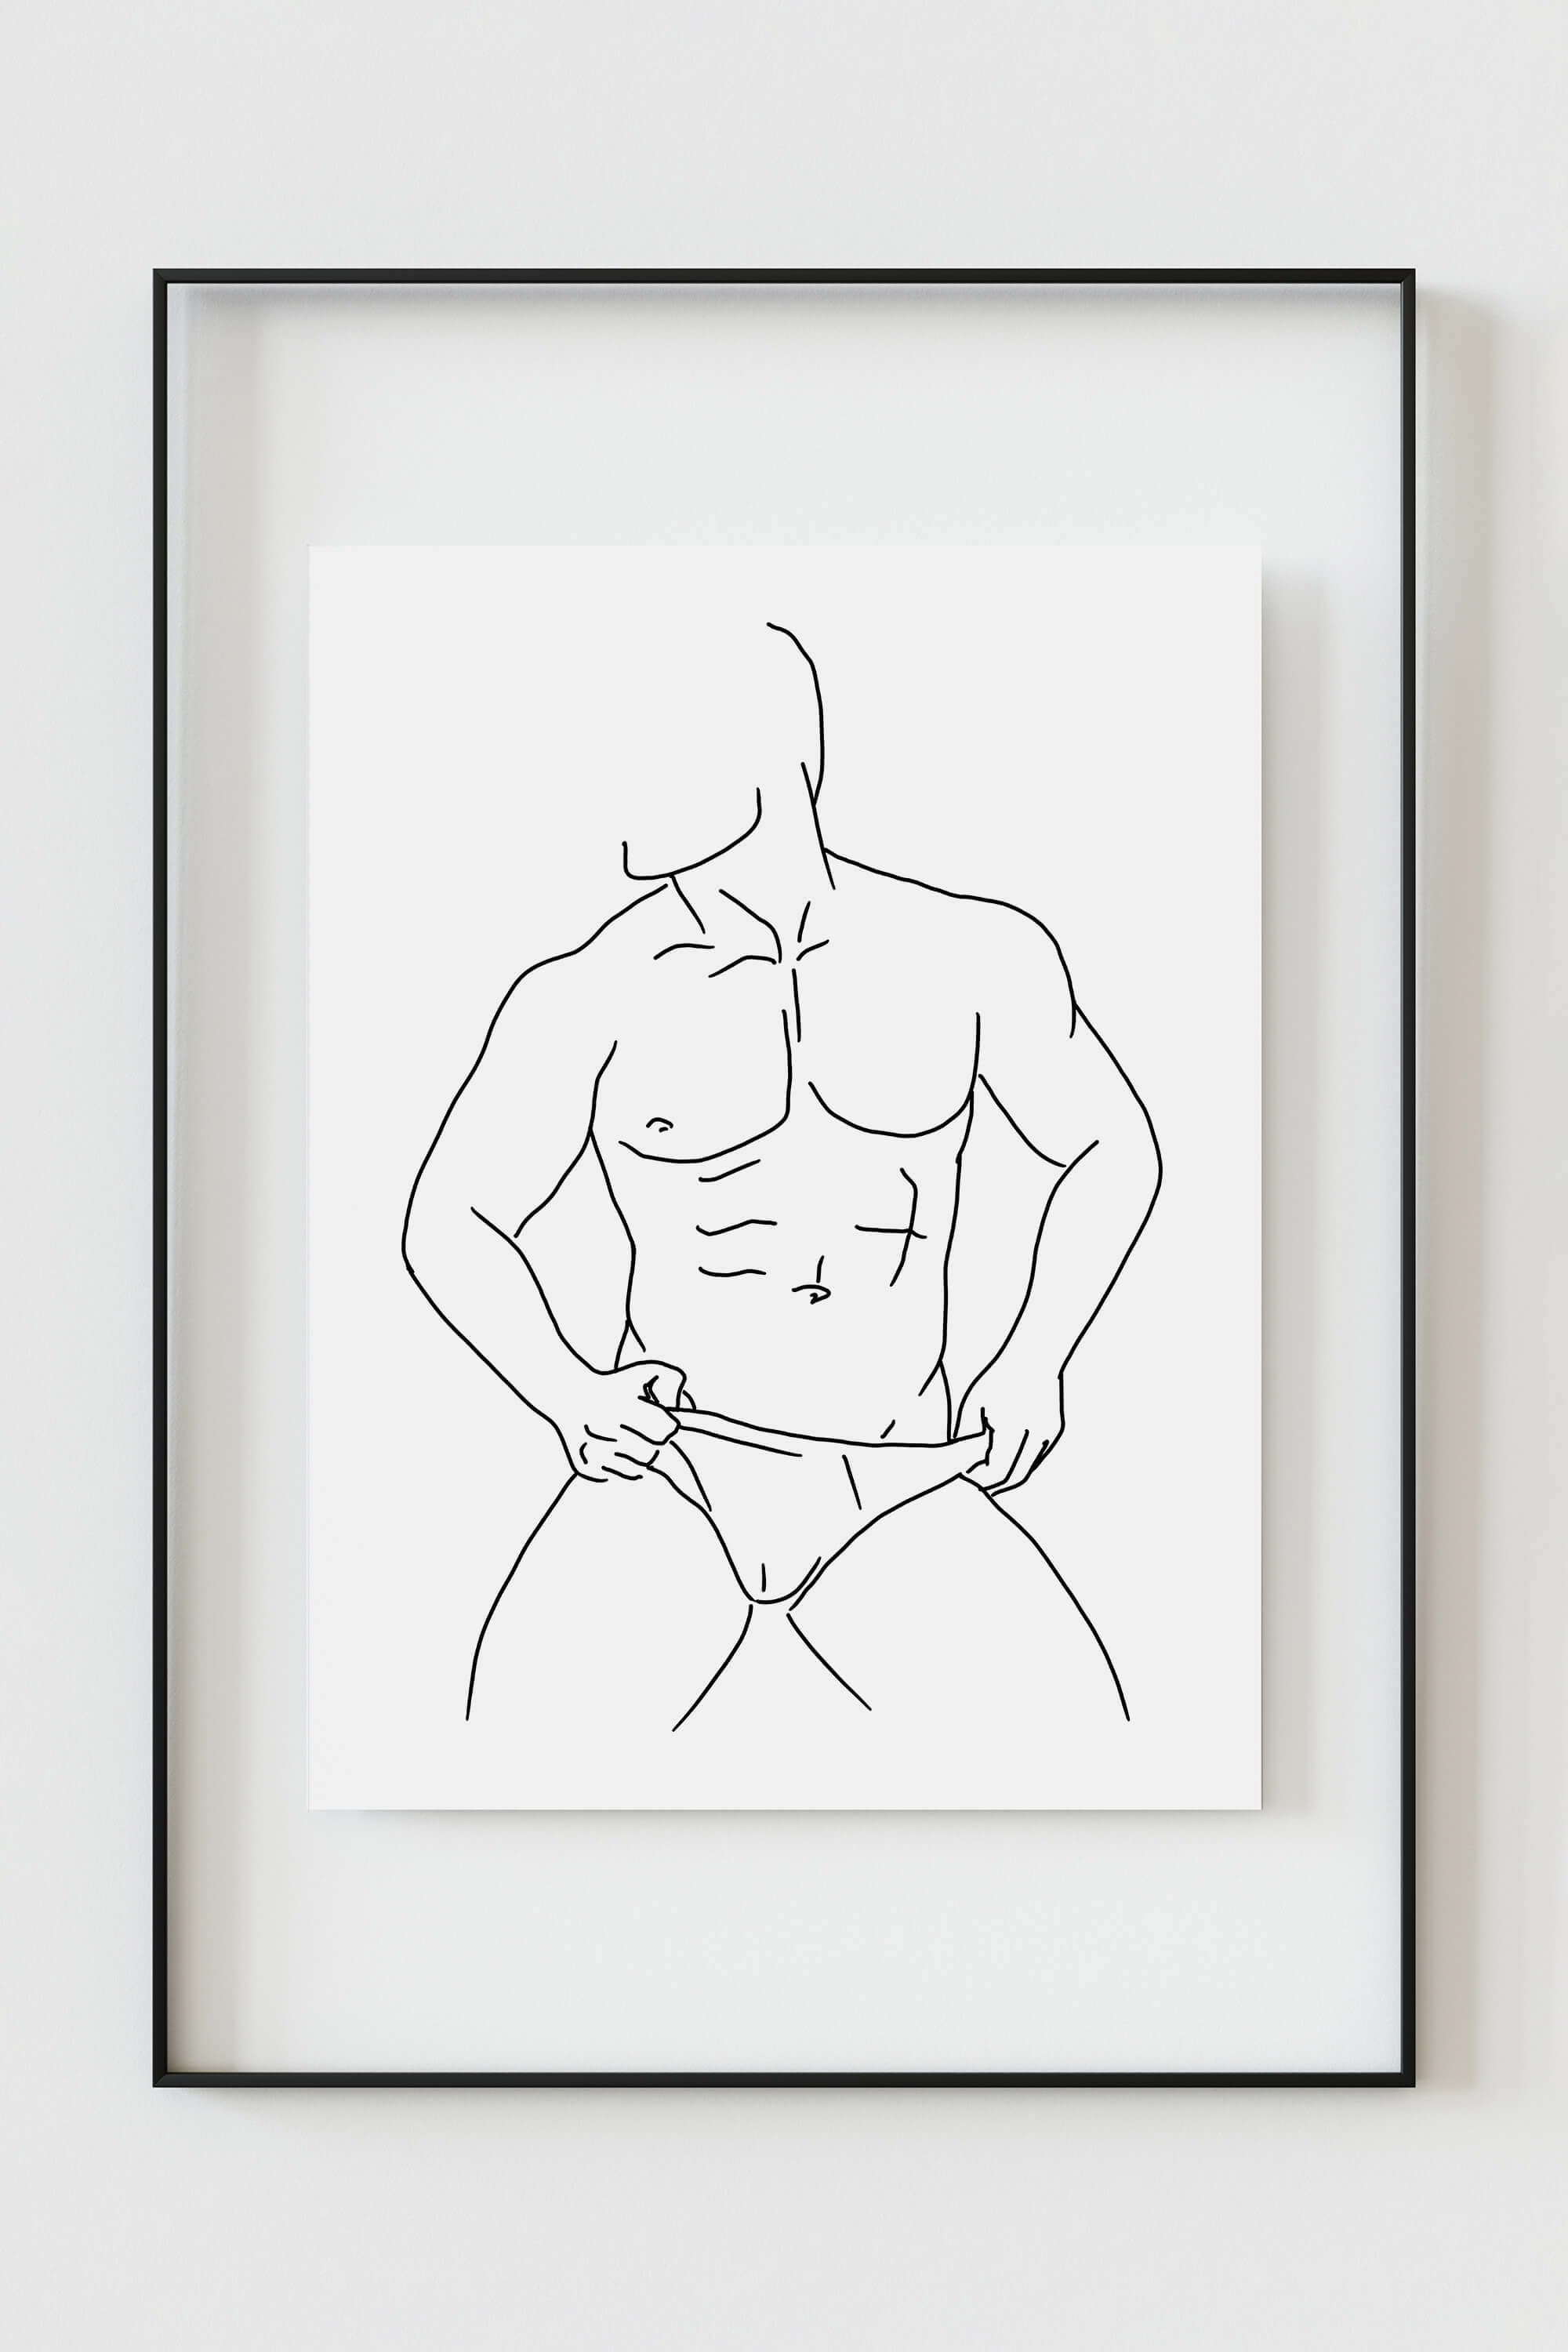 Experience elegance with this monochrome gay male line art poster. The carefully crafted lines bring sophistication to the forefront, making it an exquisite piece for art enthusiasts.